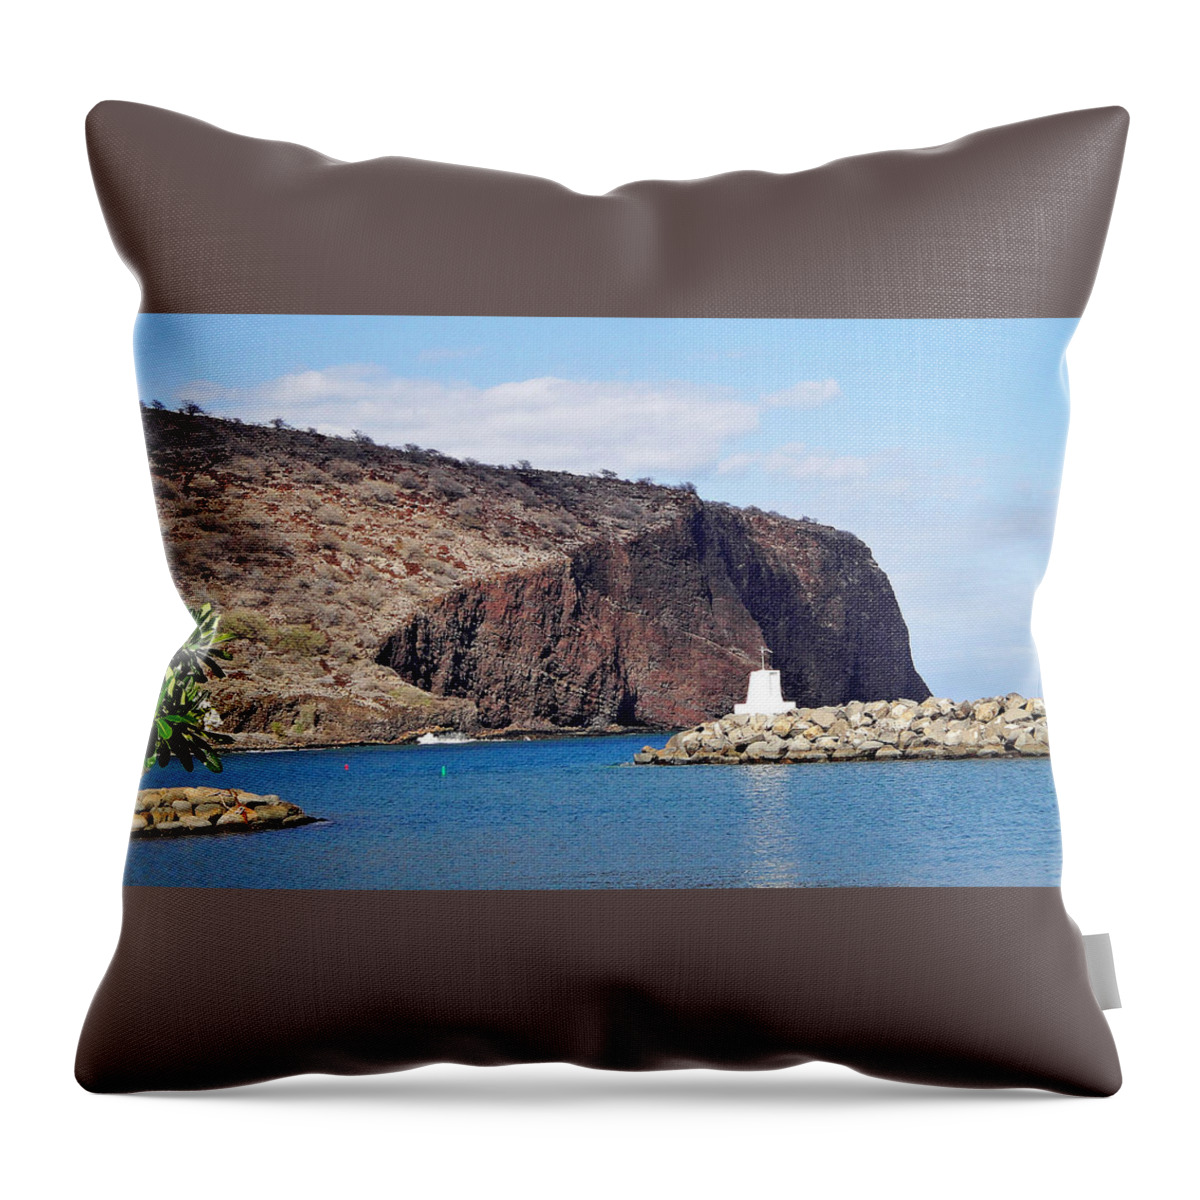 Lanai Throw Pillow featuring the photograph Lanai Harbor by Robert Meyers-Lussier